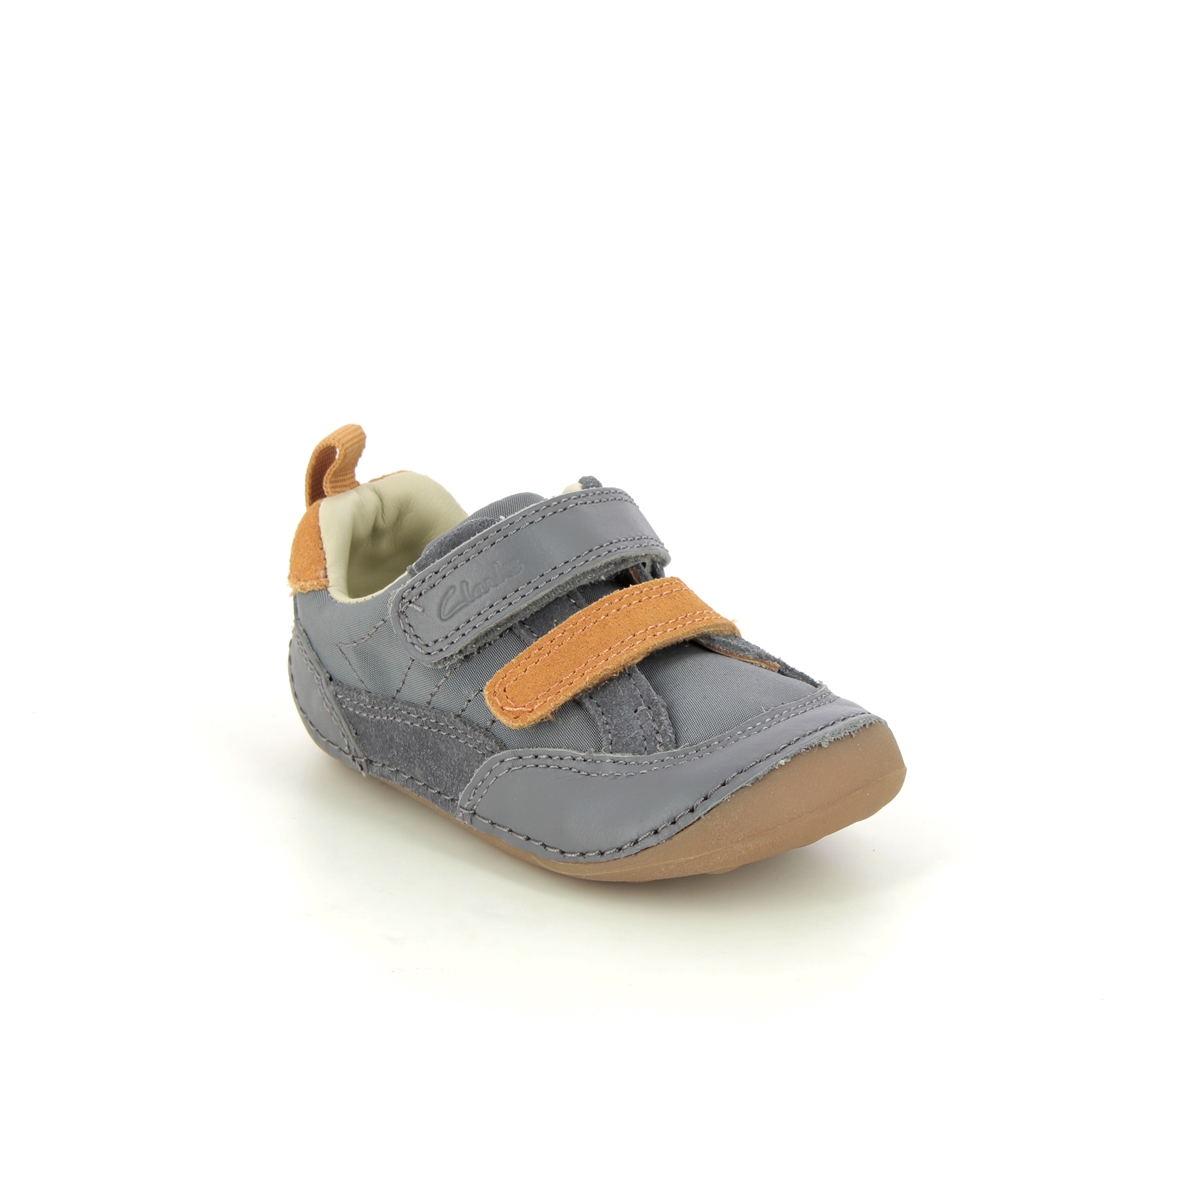 Clarks Tiny Fawn T 2v Grey leather Kids Boys First Shoes 7534-86F in a Plain Leather in Size 2.5